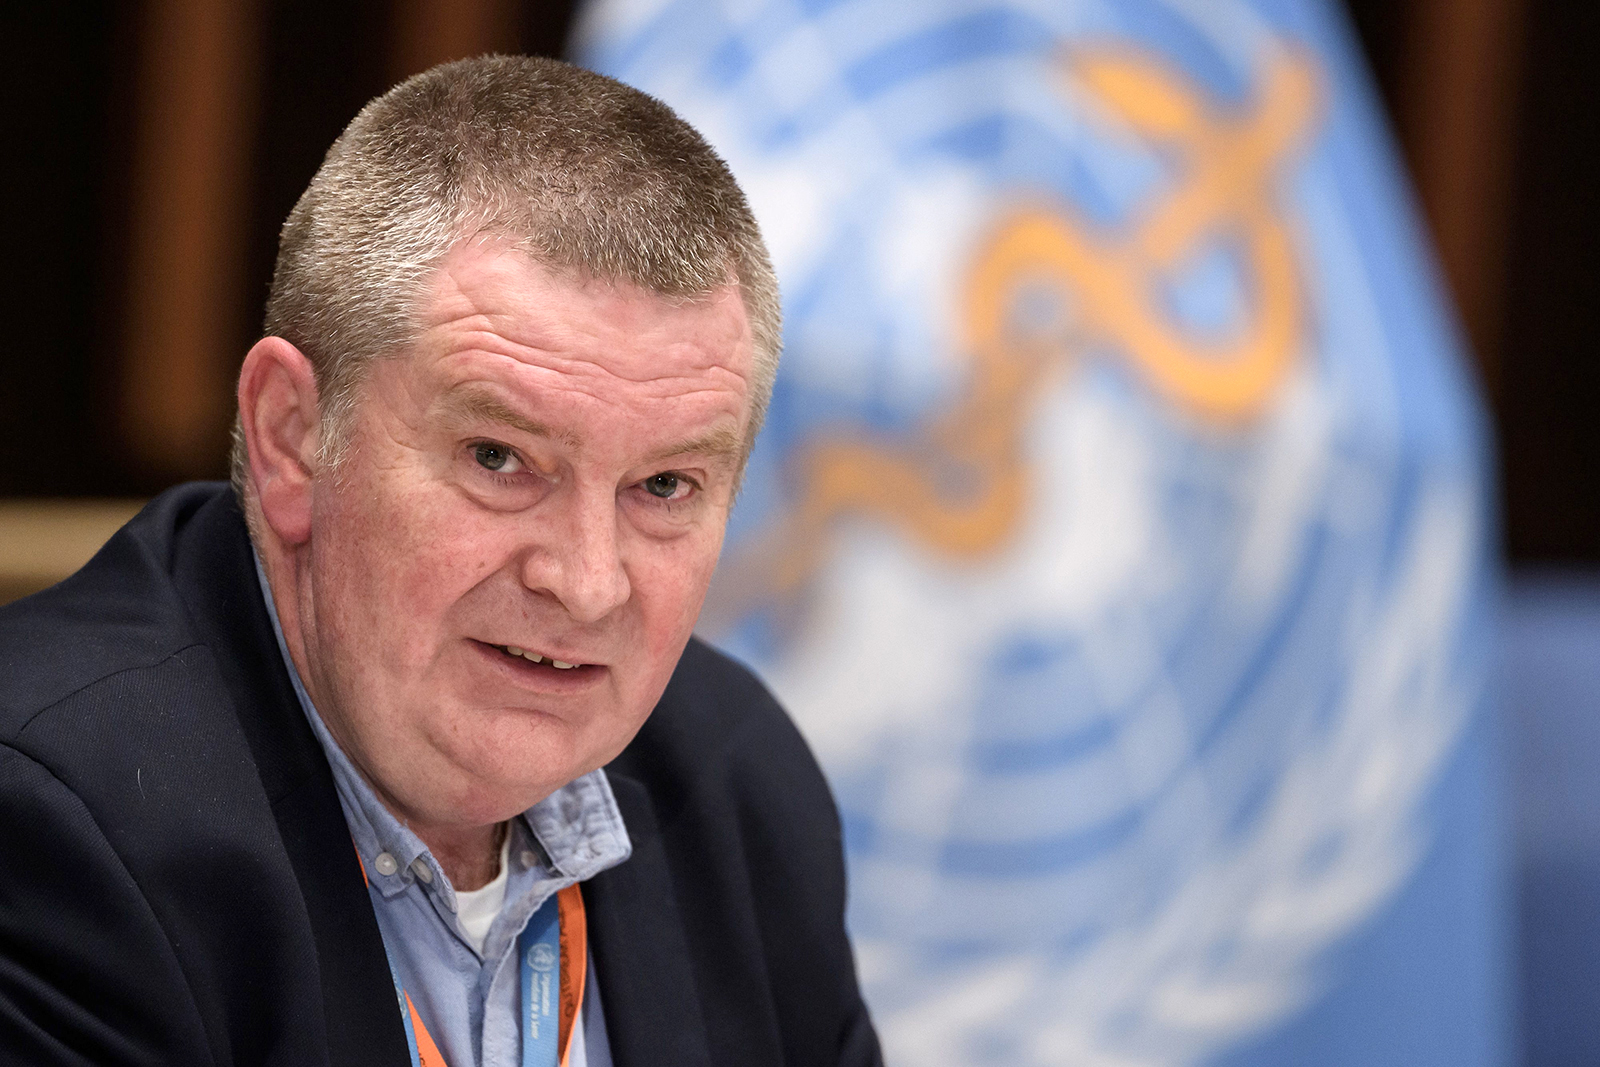 WHO Health Emergencies Programme head Michael Ryan attends a press conference at the WHO headquarters in Geneva, Switzerland on July 3.